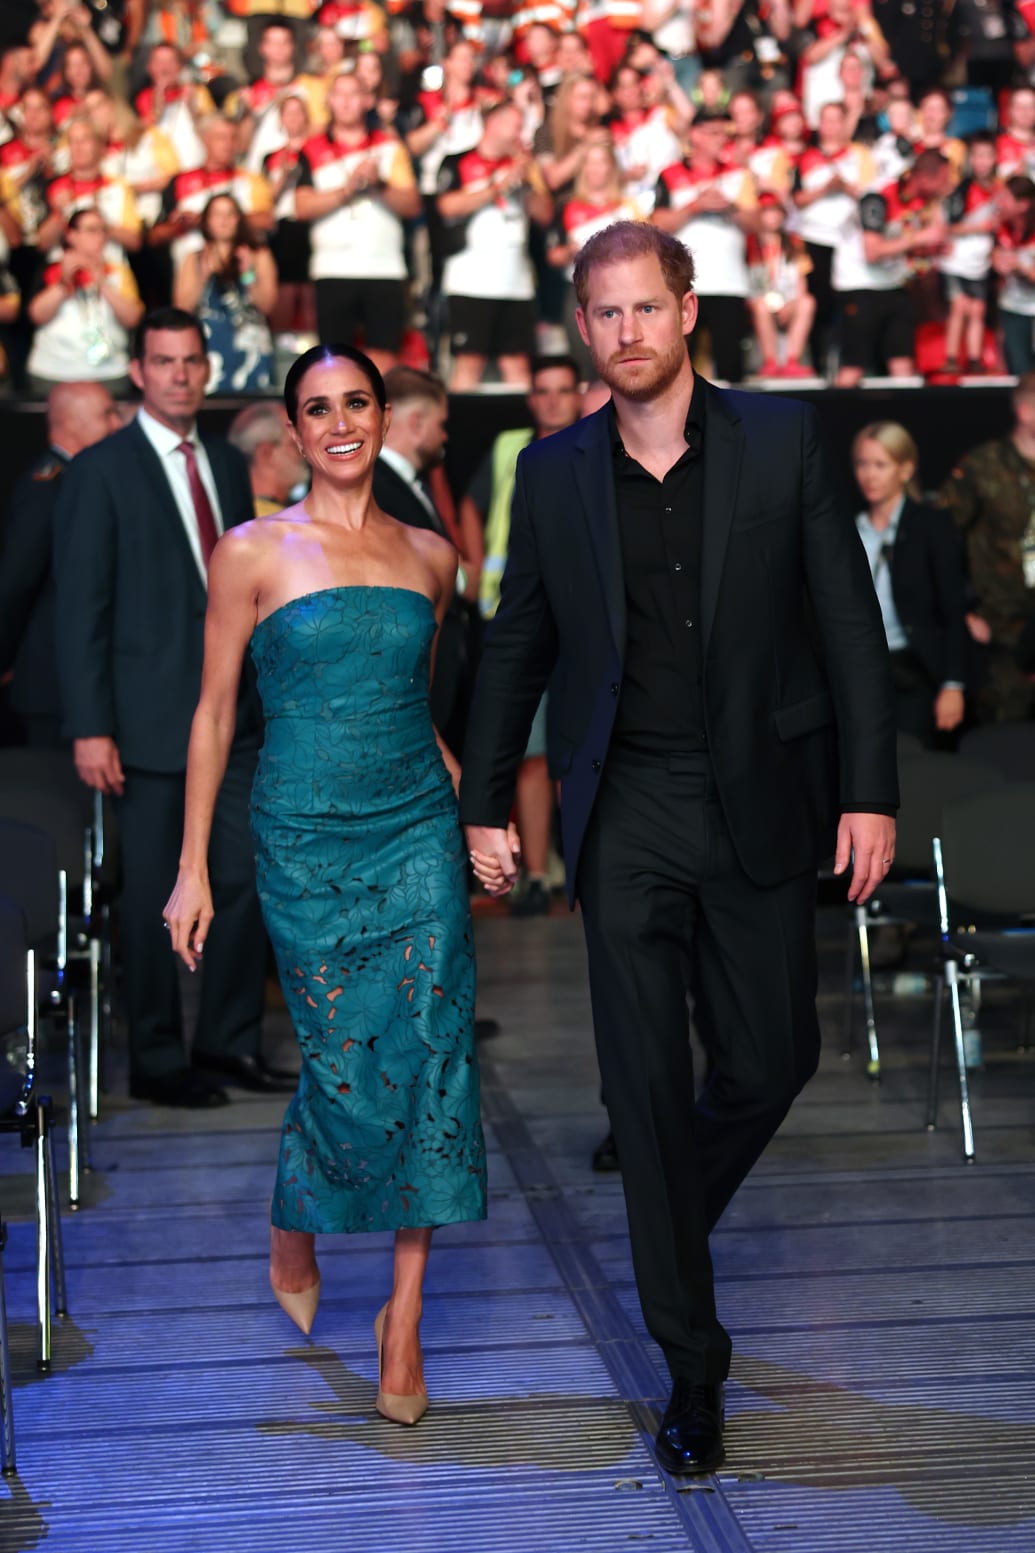 Prince Harry, Duke of Sussex, and Meghan, Duchess of Sussex attend the closing ceremony of the Invictus Games Düsseldorf 2023 at Merkur Spiel-Arena on September 16, 2023 in Dusseldorf, Germany.